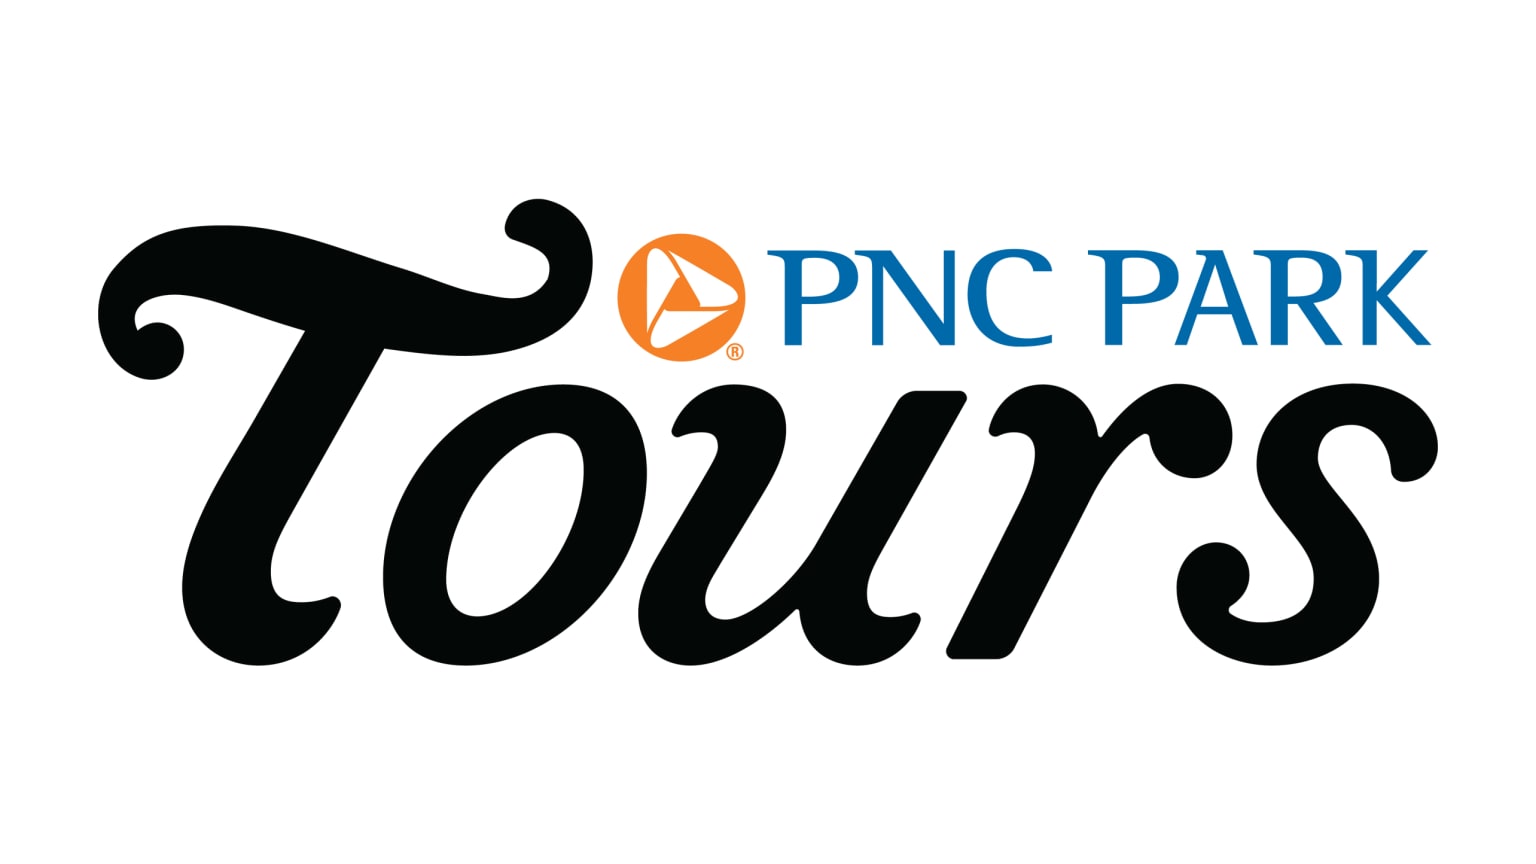 Culinary Tour of PNC Park & Food Map - Visit Pittsburgh